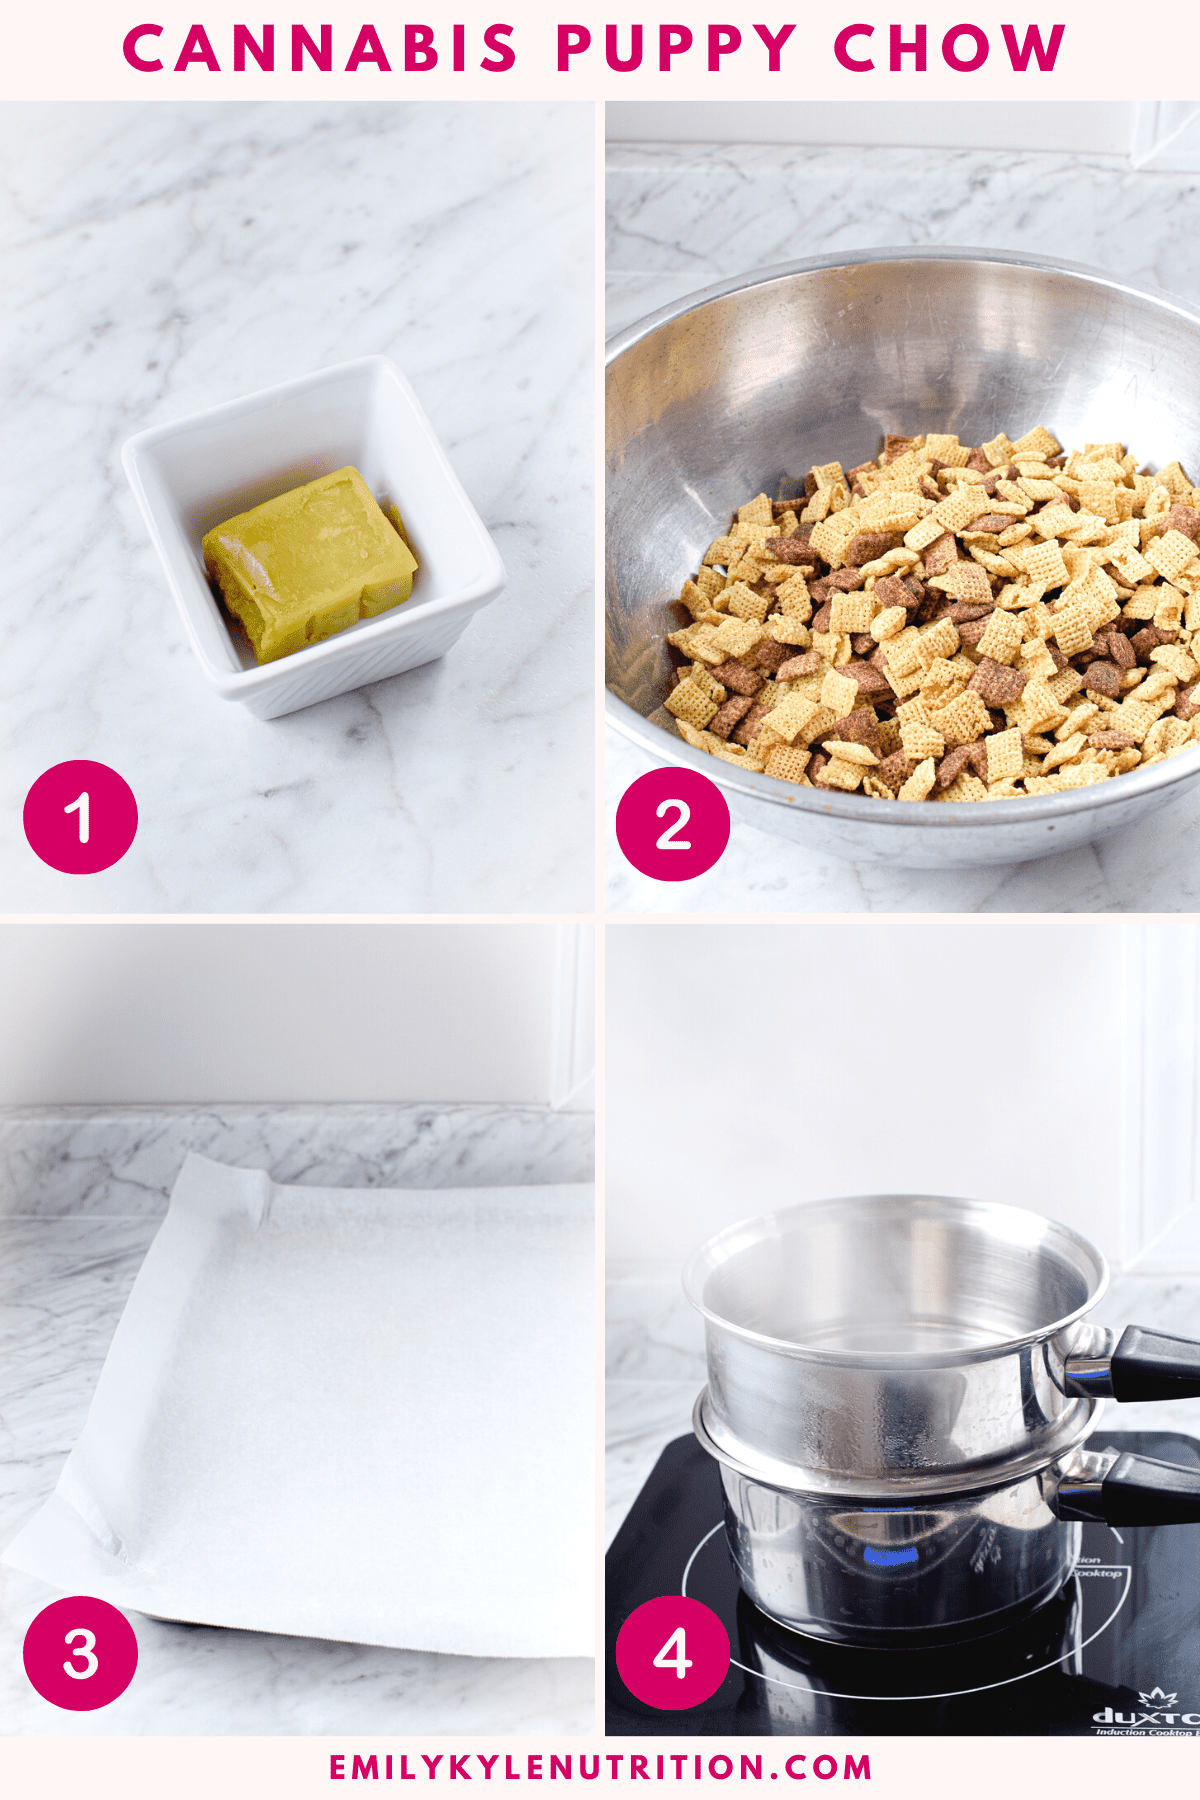 A four step image collage showing the steps to make cannabis puppy chow